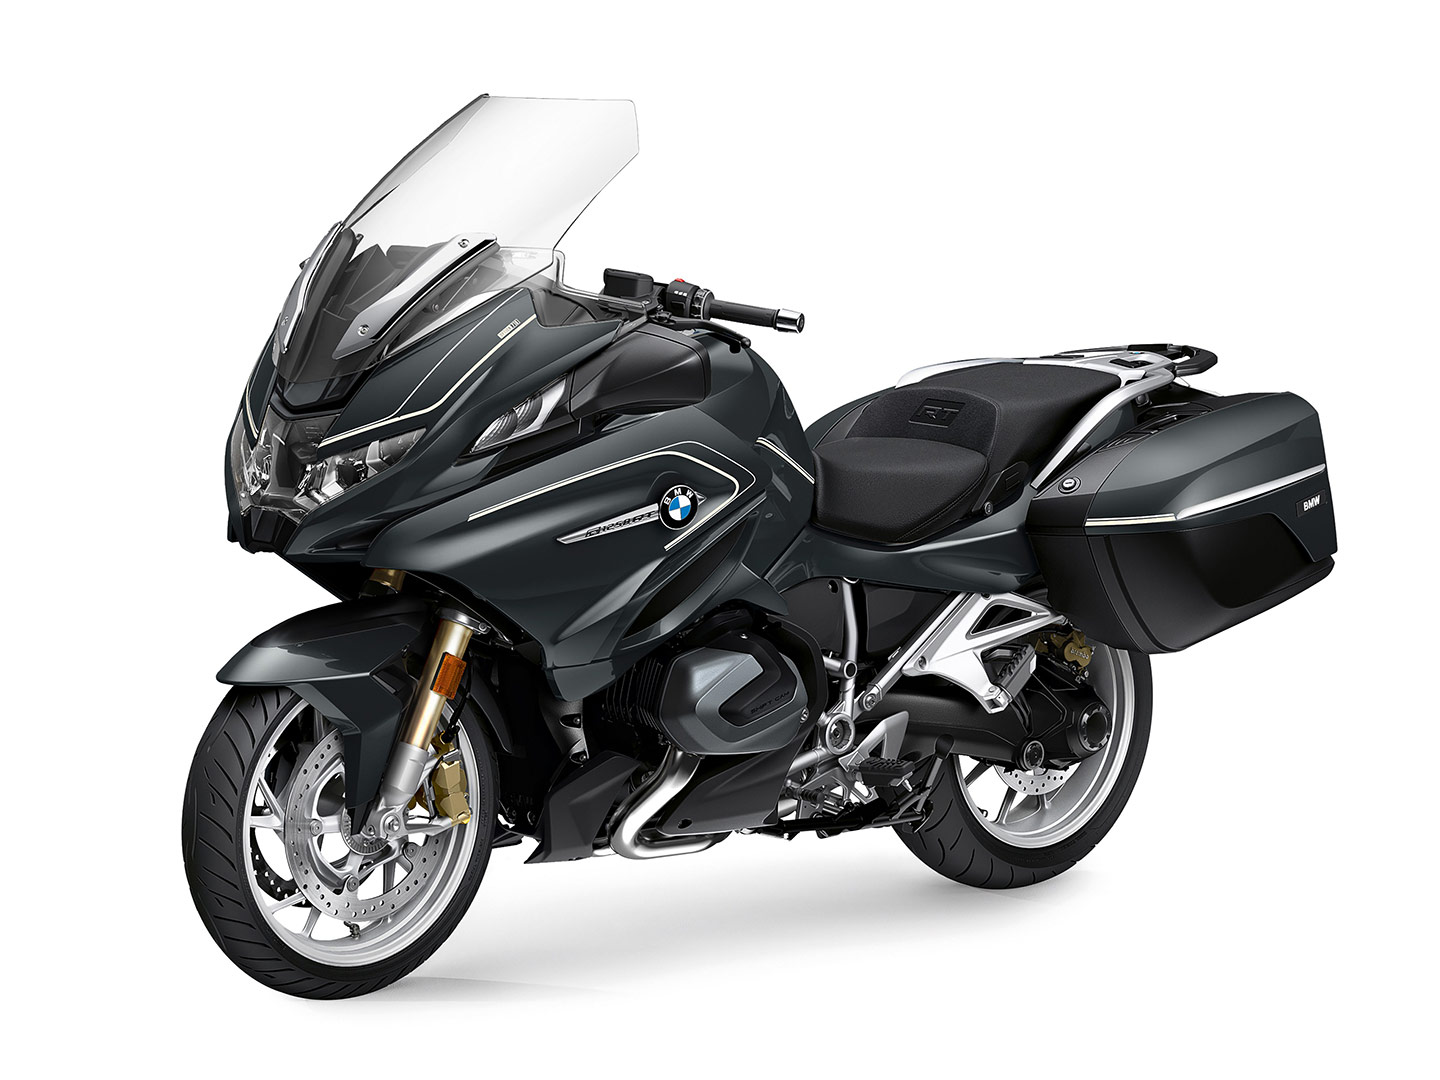 India-bound BMW R 1300 GS to make its global debut on this date